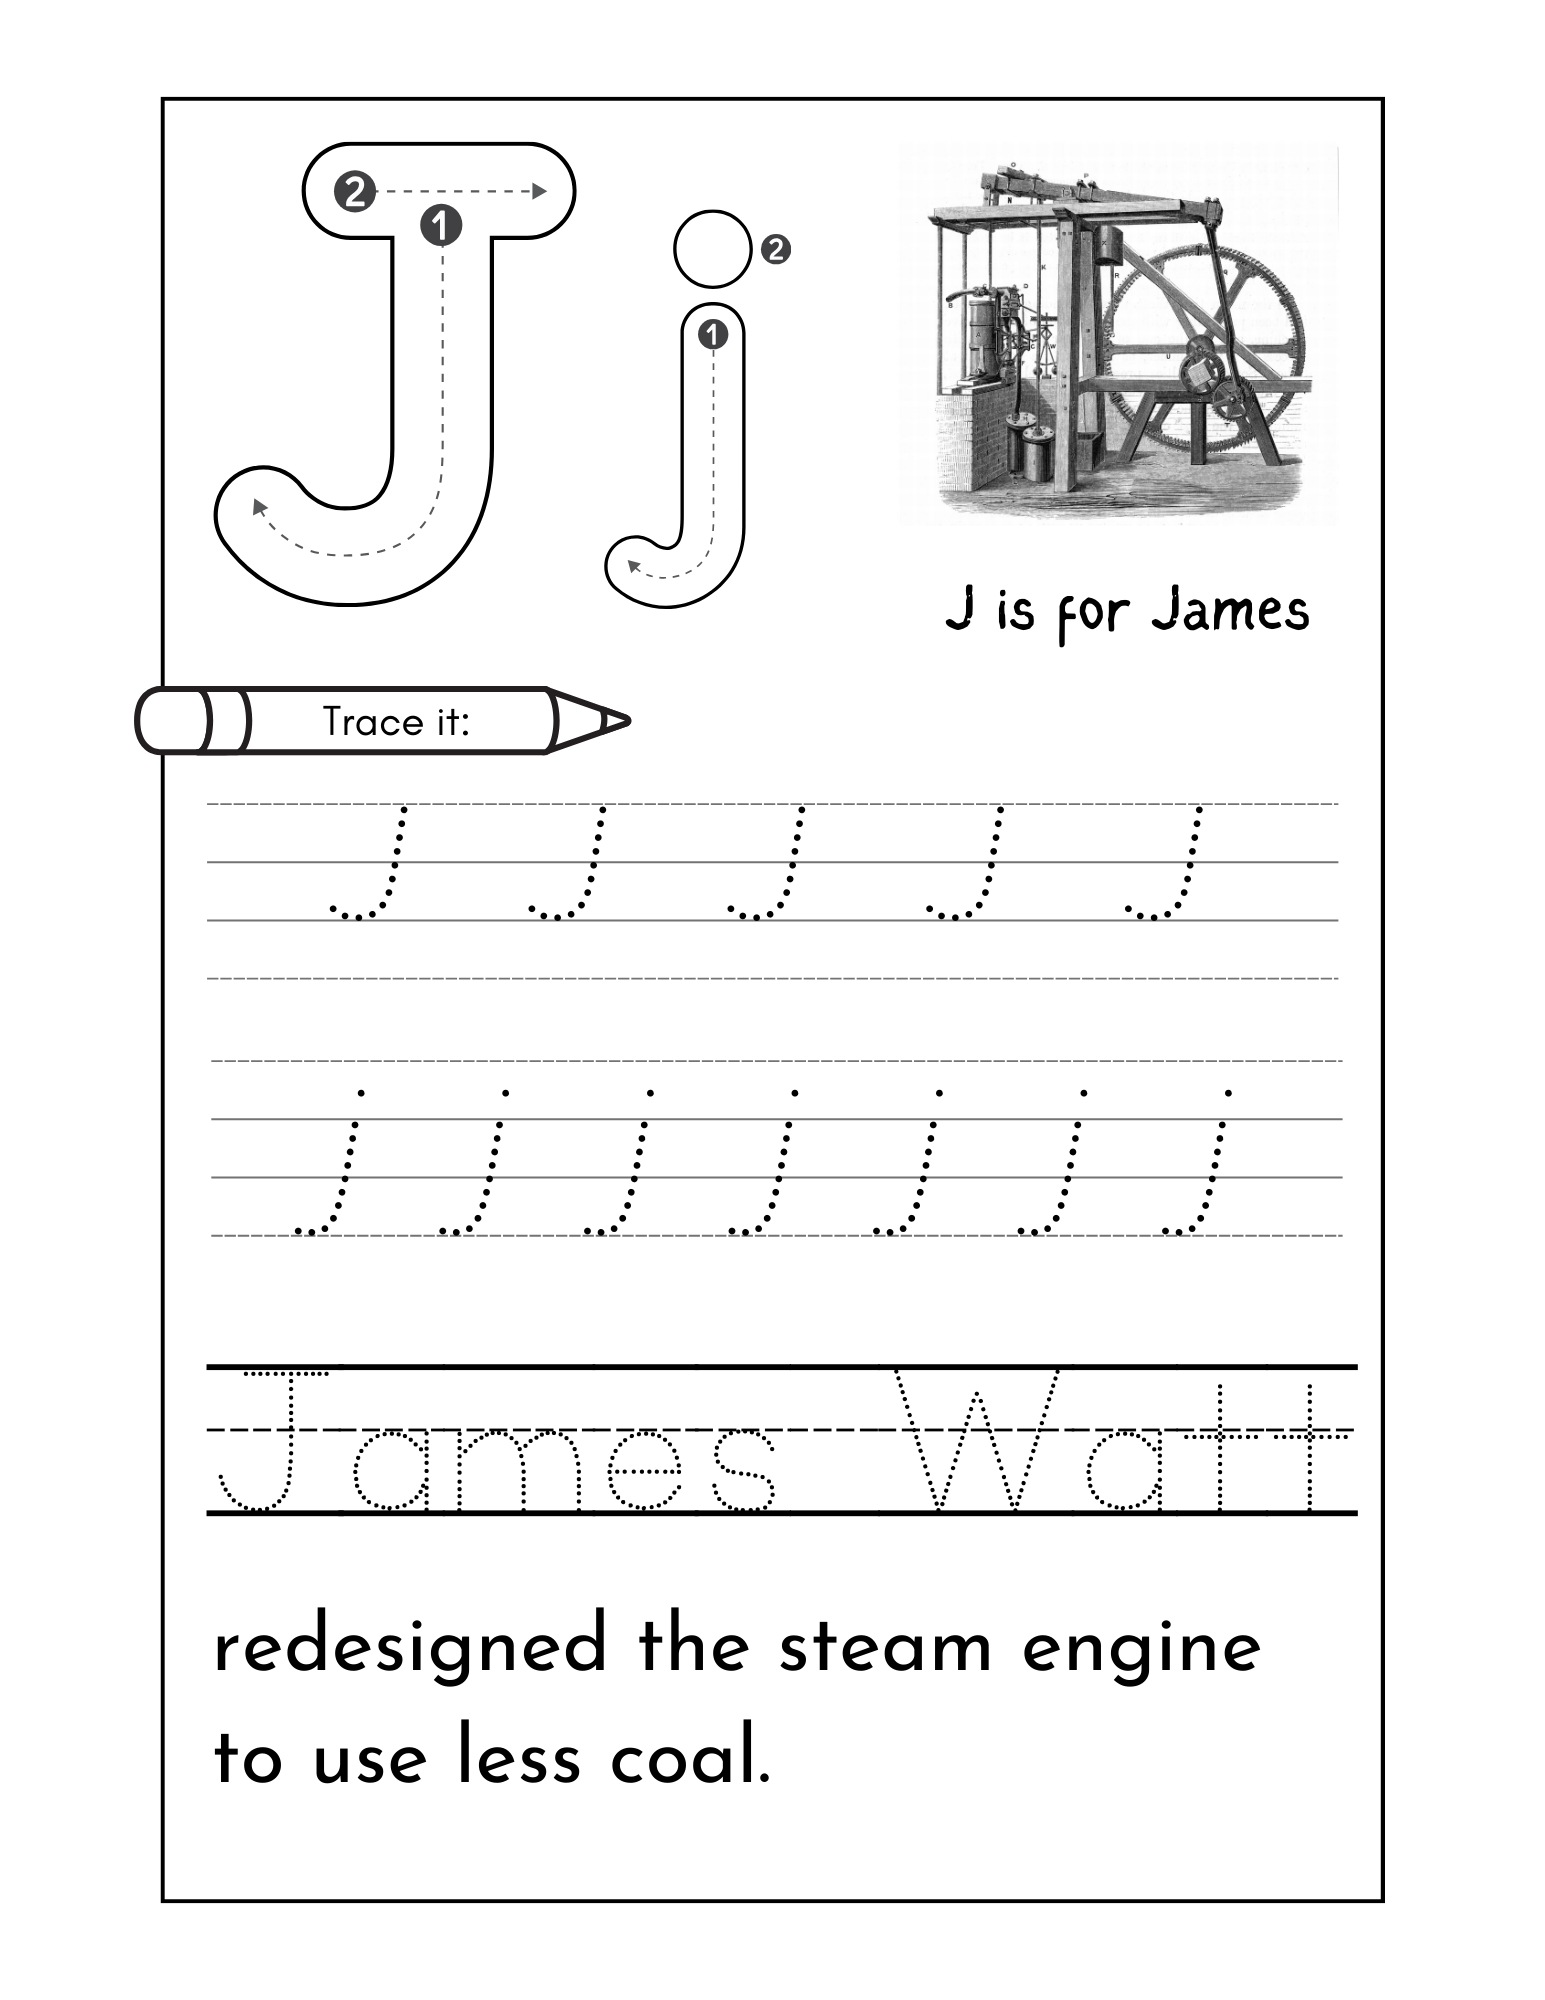 J is for James.png__PID:97dbd465-bf97-47cc-97ad-8ed4fc67c45e